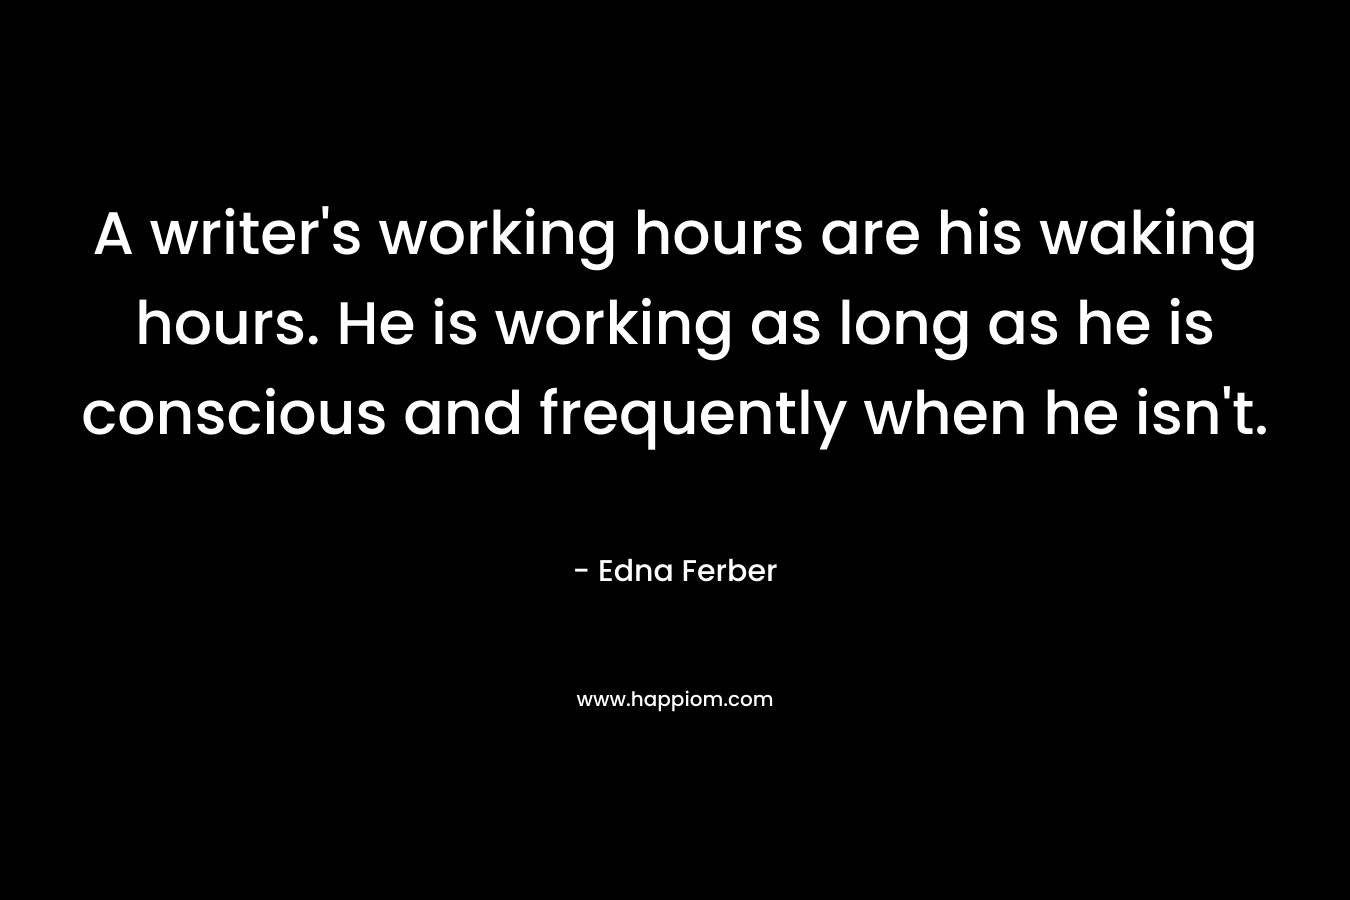 A writer's working hours are his waking hours. He is working as long as he is conscious and frequently when he isn't.